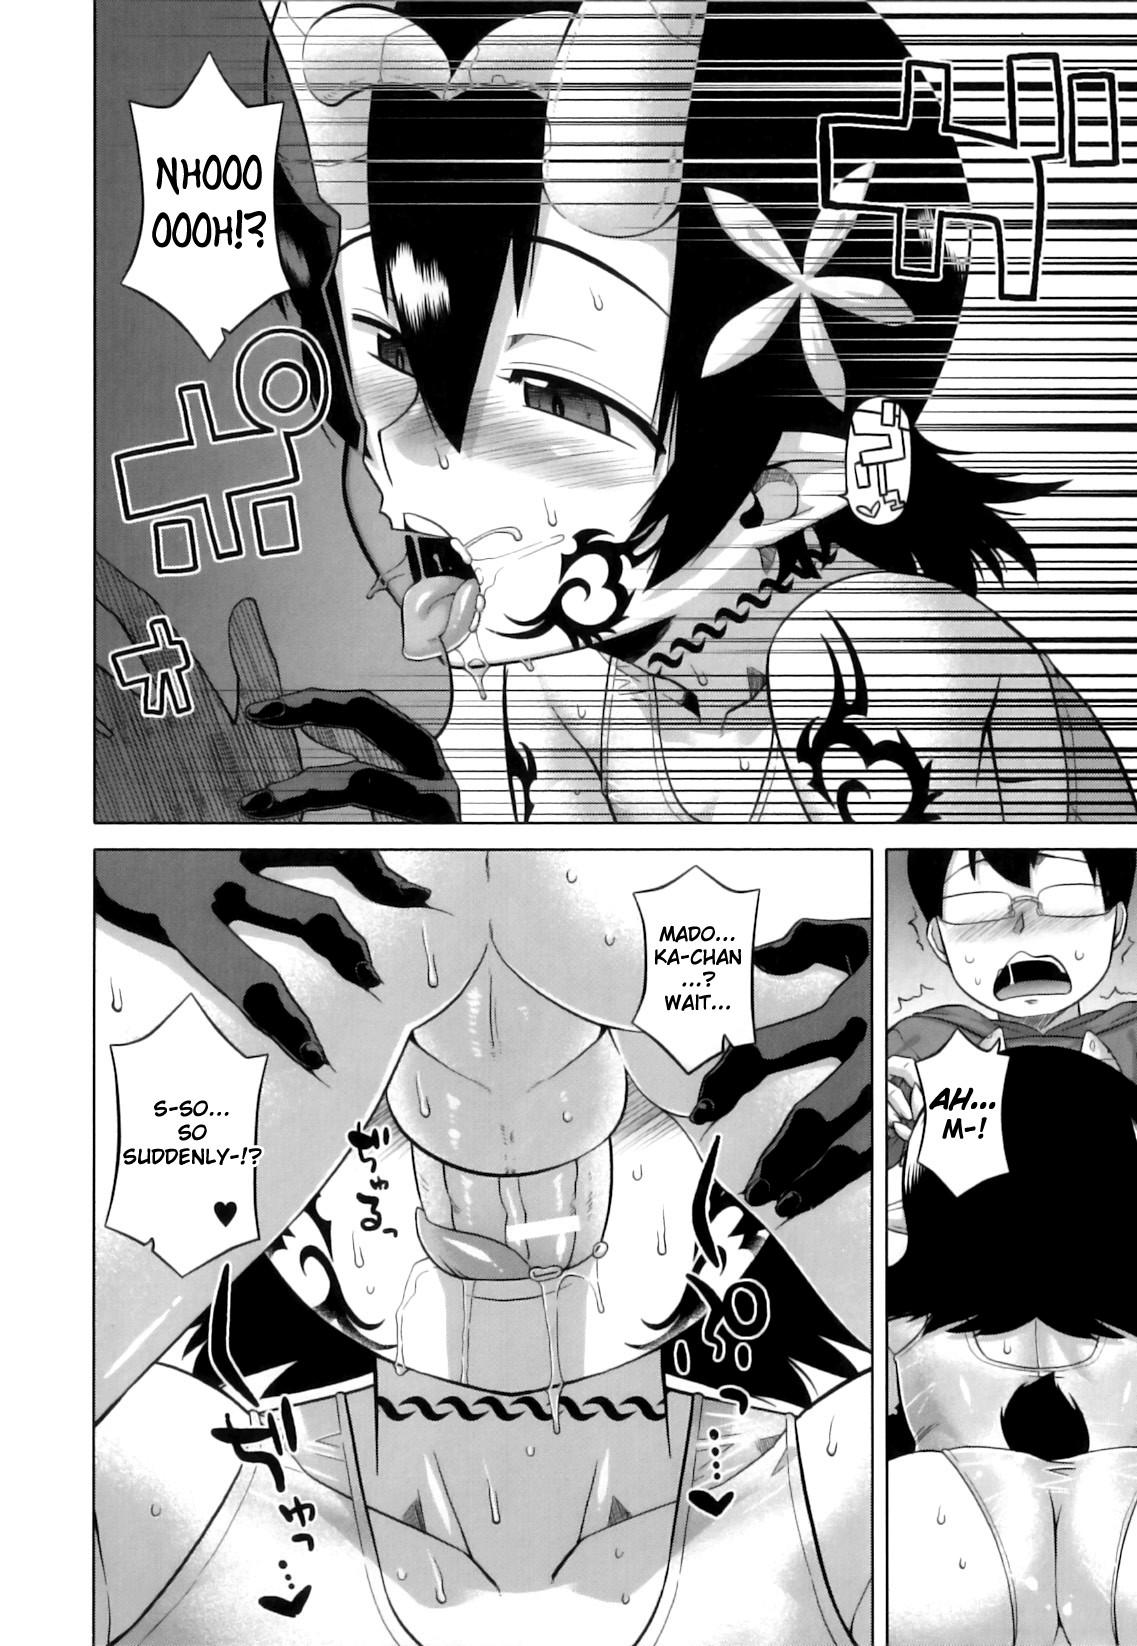 The Succubus Lady From Next Door Ch. 1-3 60